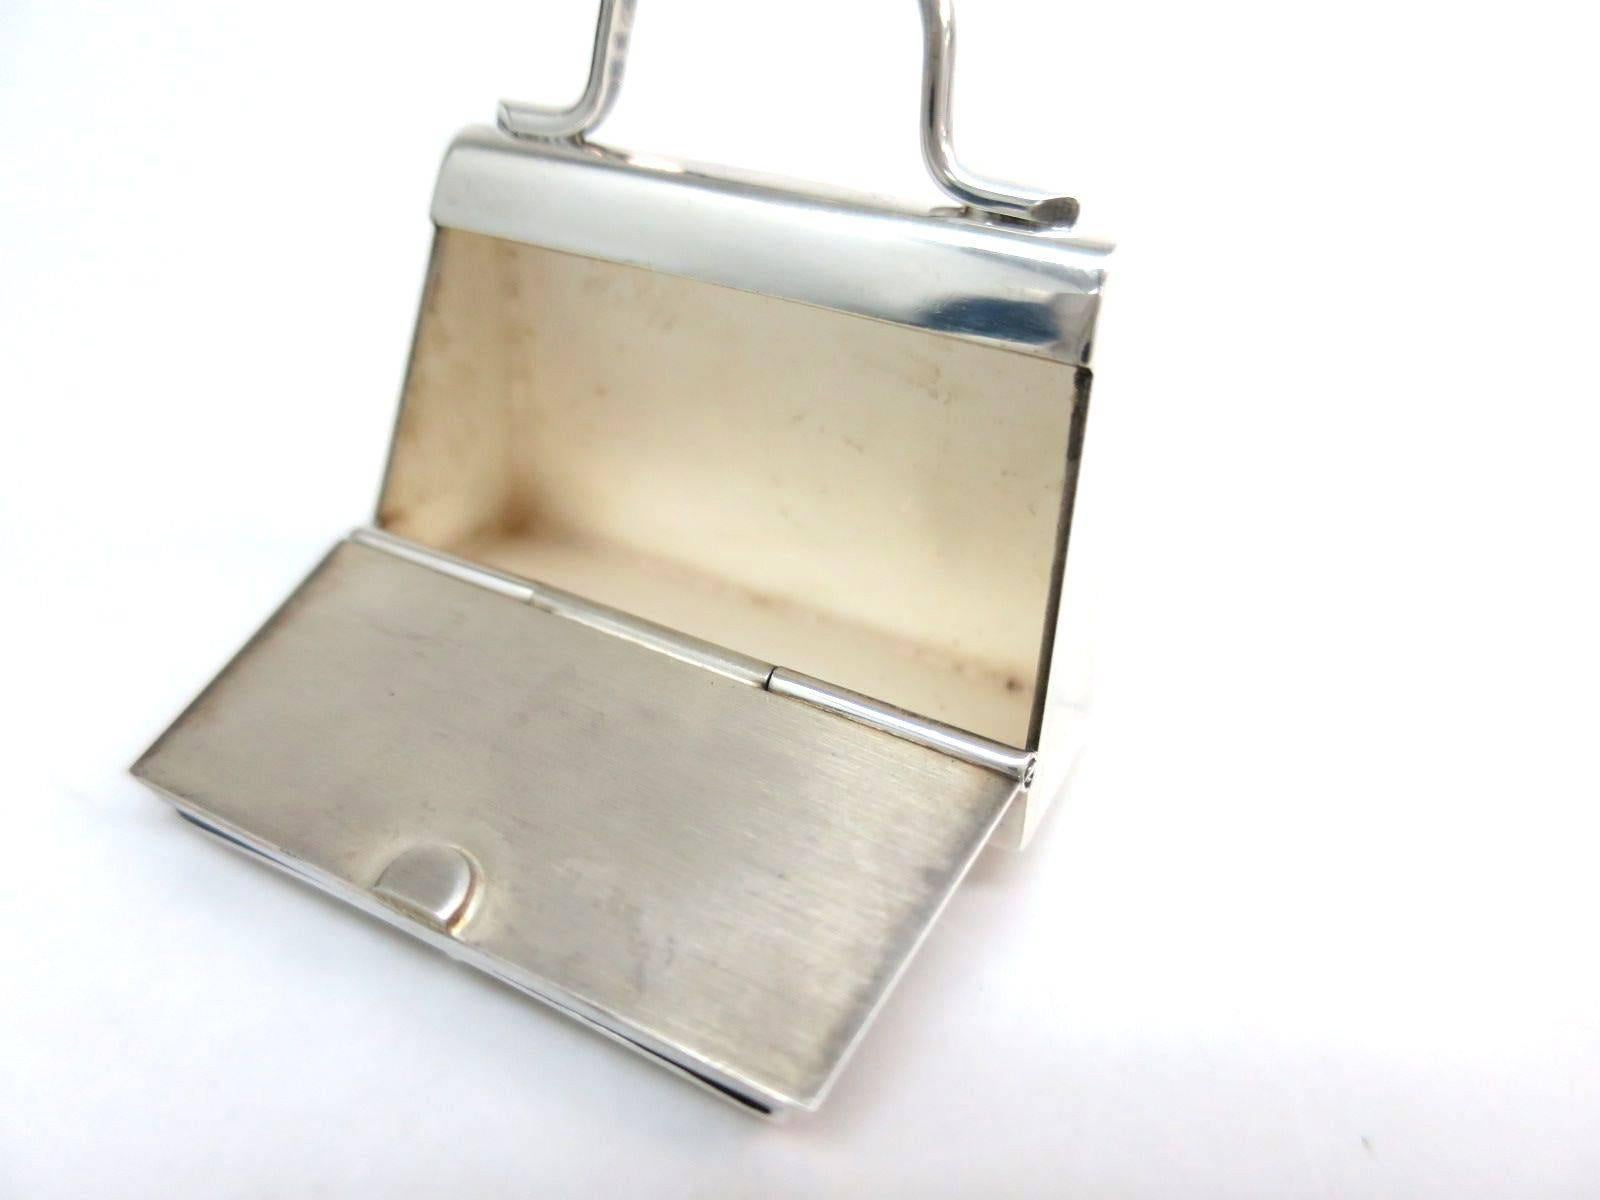 CURATOR'S NOTES

A Kelly bag in rare form: Hermes vintage sterling silver pill box.

Sterling silver 
Made in England
Measures 1.8